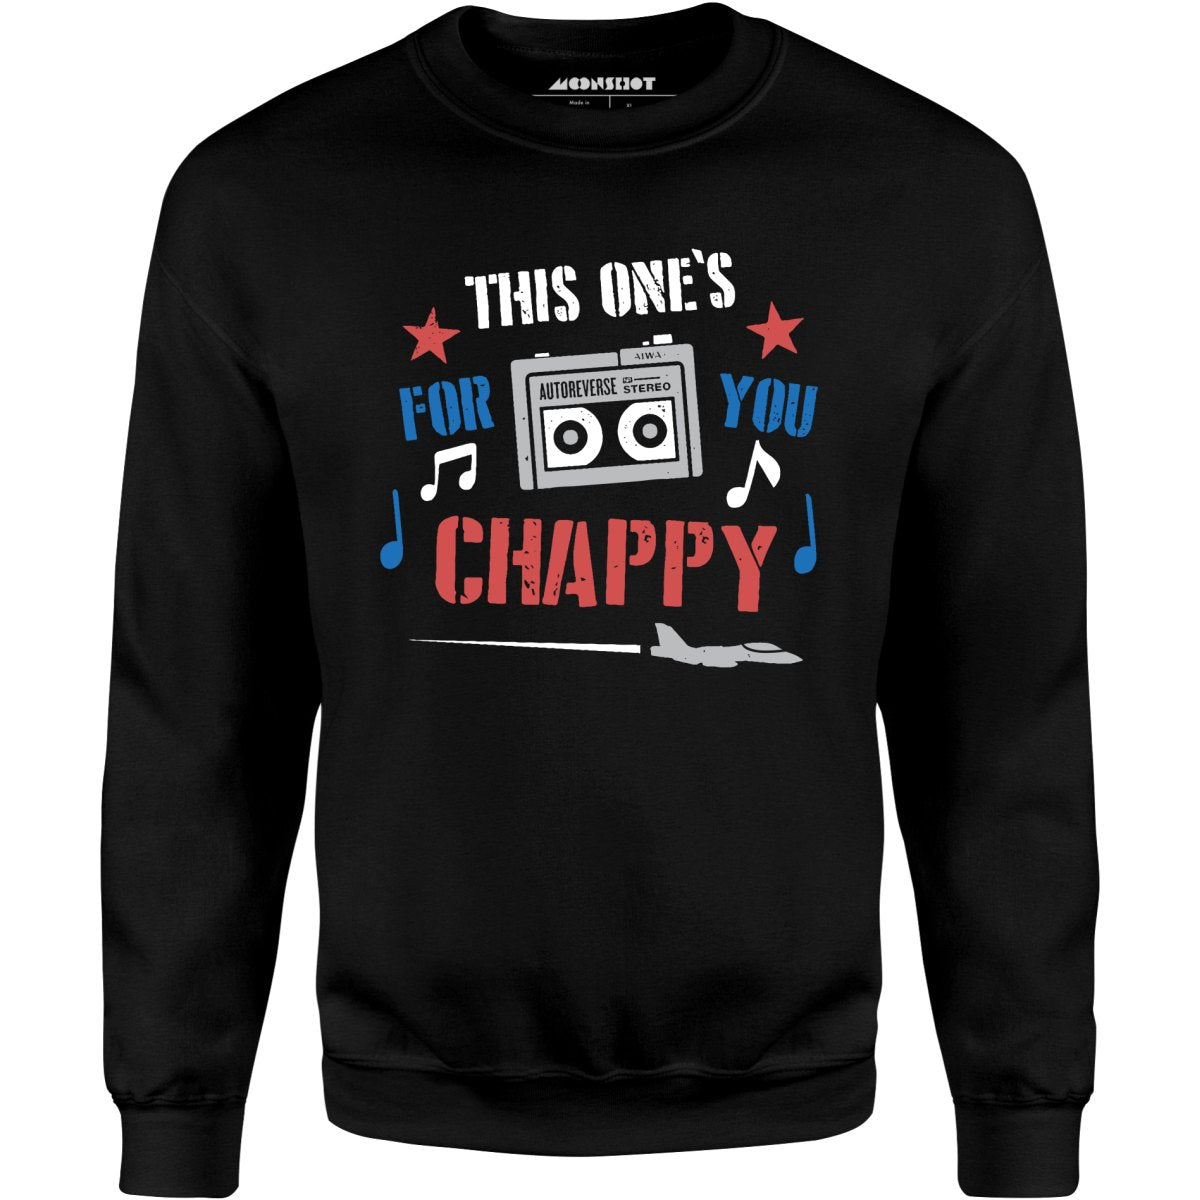 This One's For You Chappy - Iron Eagle - Unisex Sweatshirt